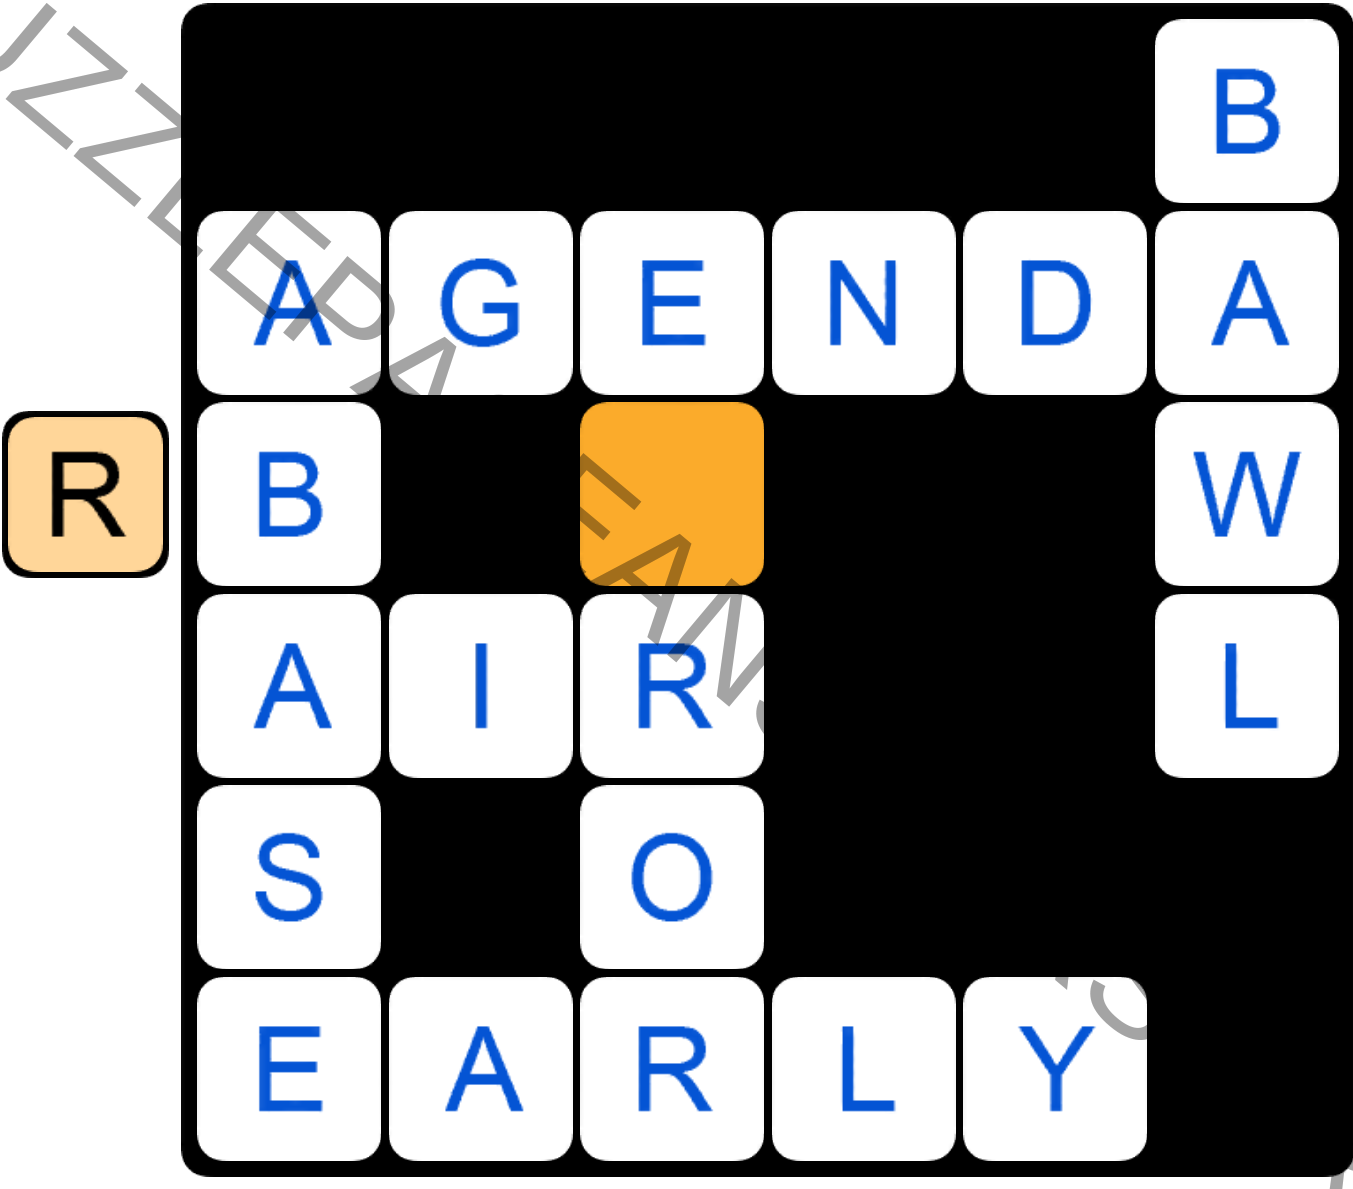 Puzzle Page Word Slide April 16 2020 Answers Puzzle Page Answers